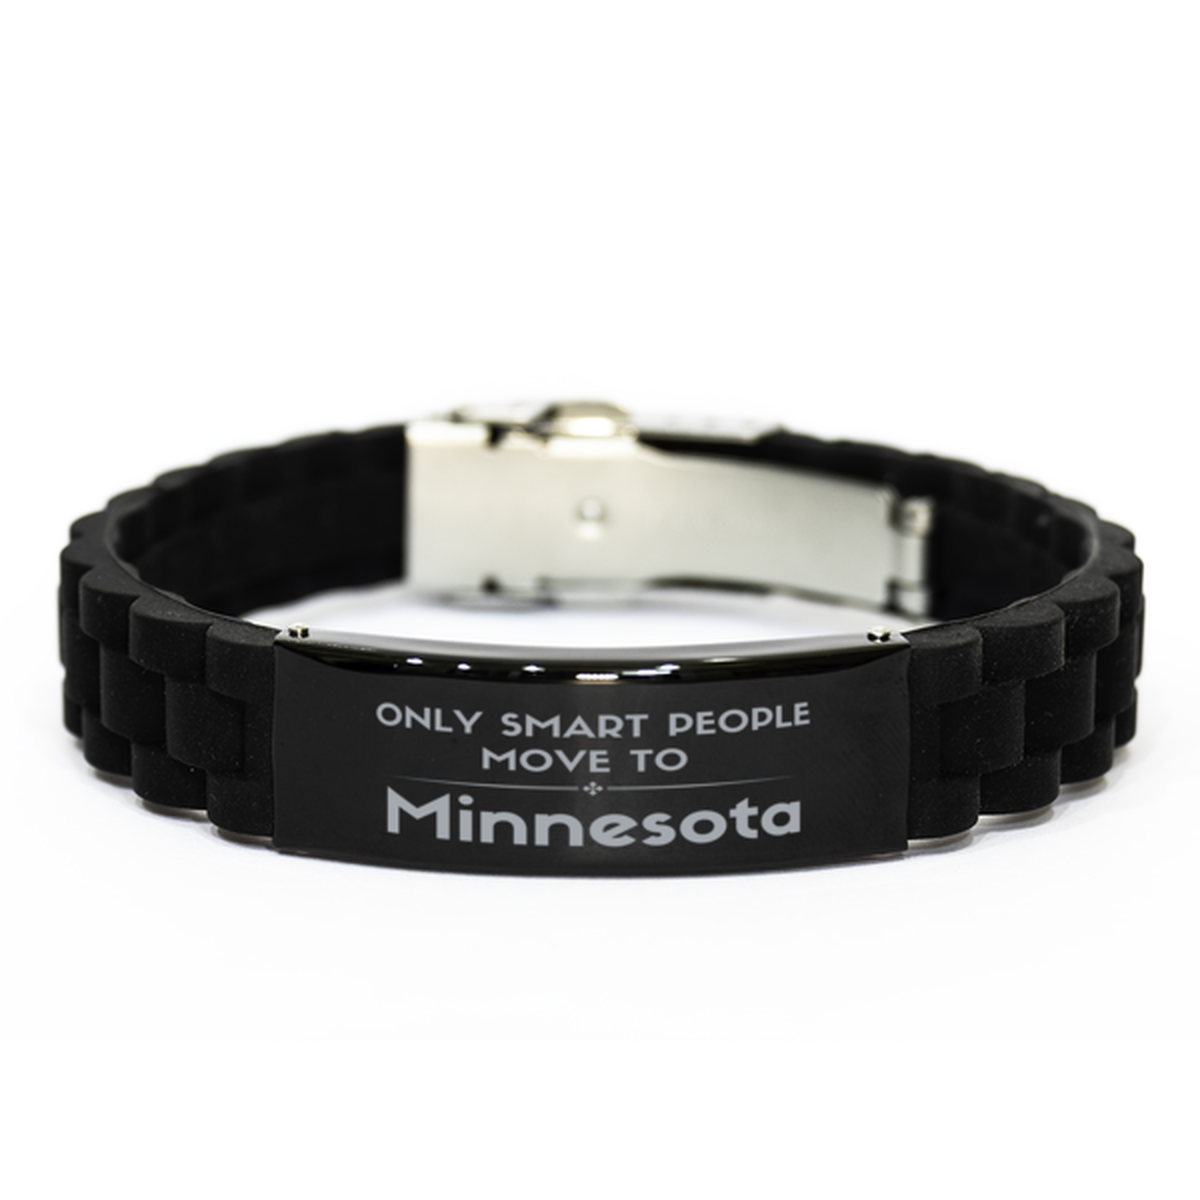 Only smart people move to Minnesota Black Glidelock Clasp Bracelet, Gag Gifts For Minnesota, Move to Minnesota Gifts for Friends Coworker Funny Saying Quote